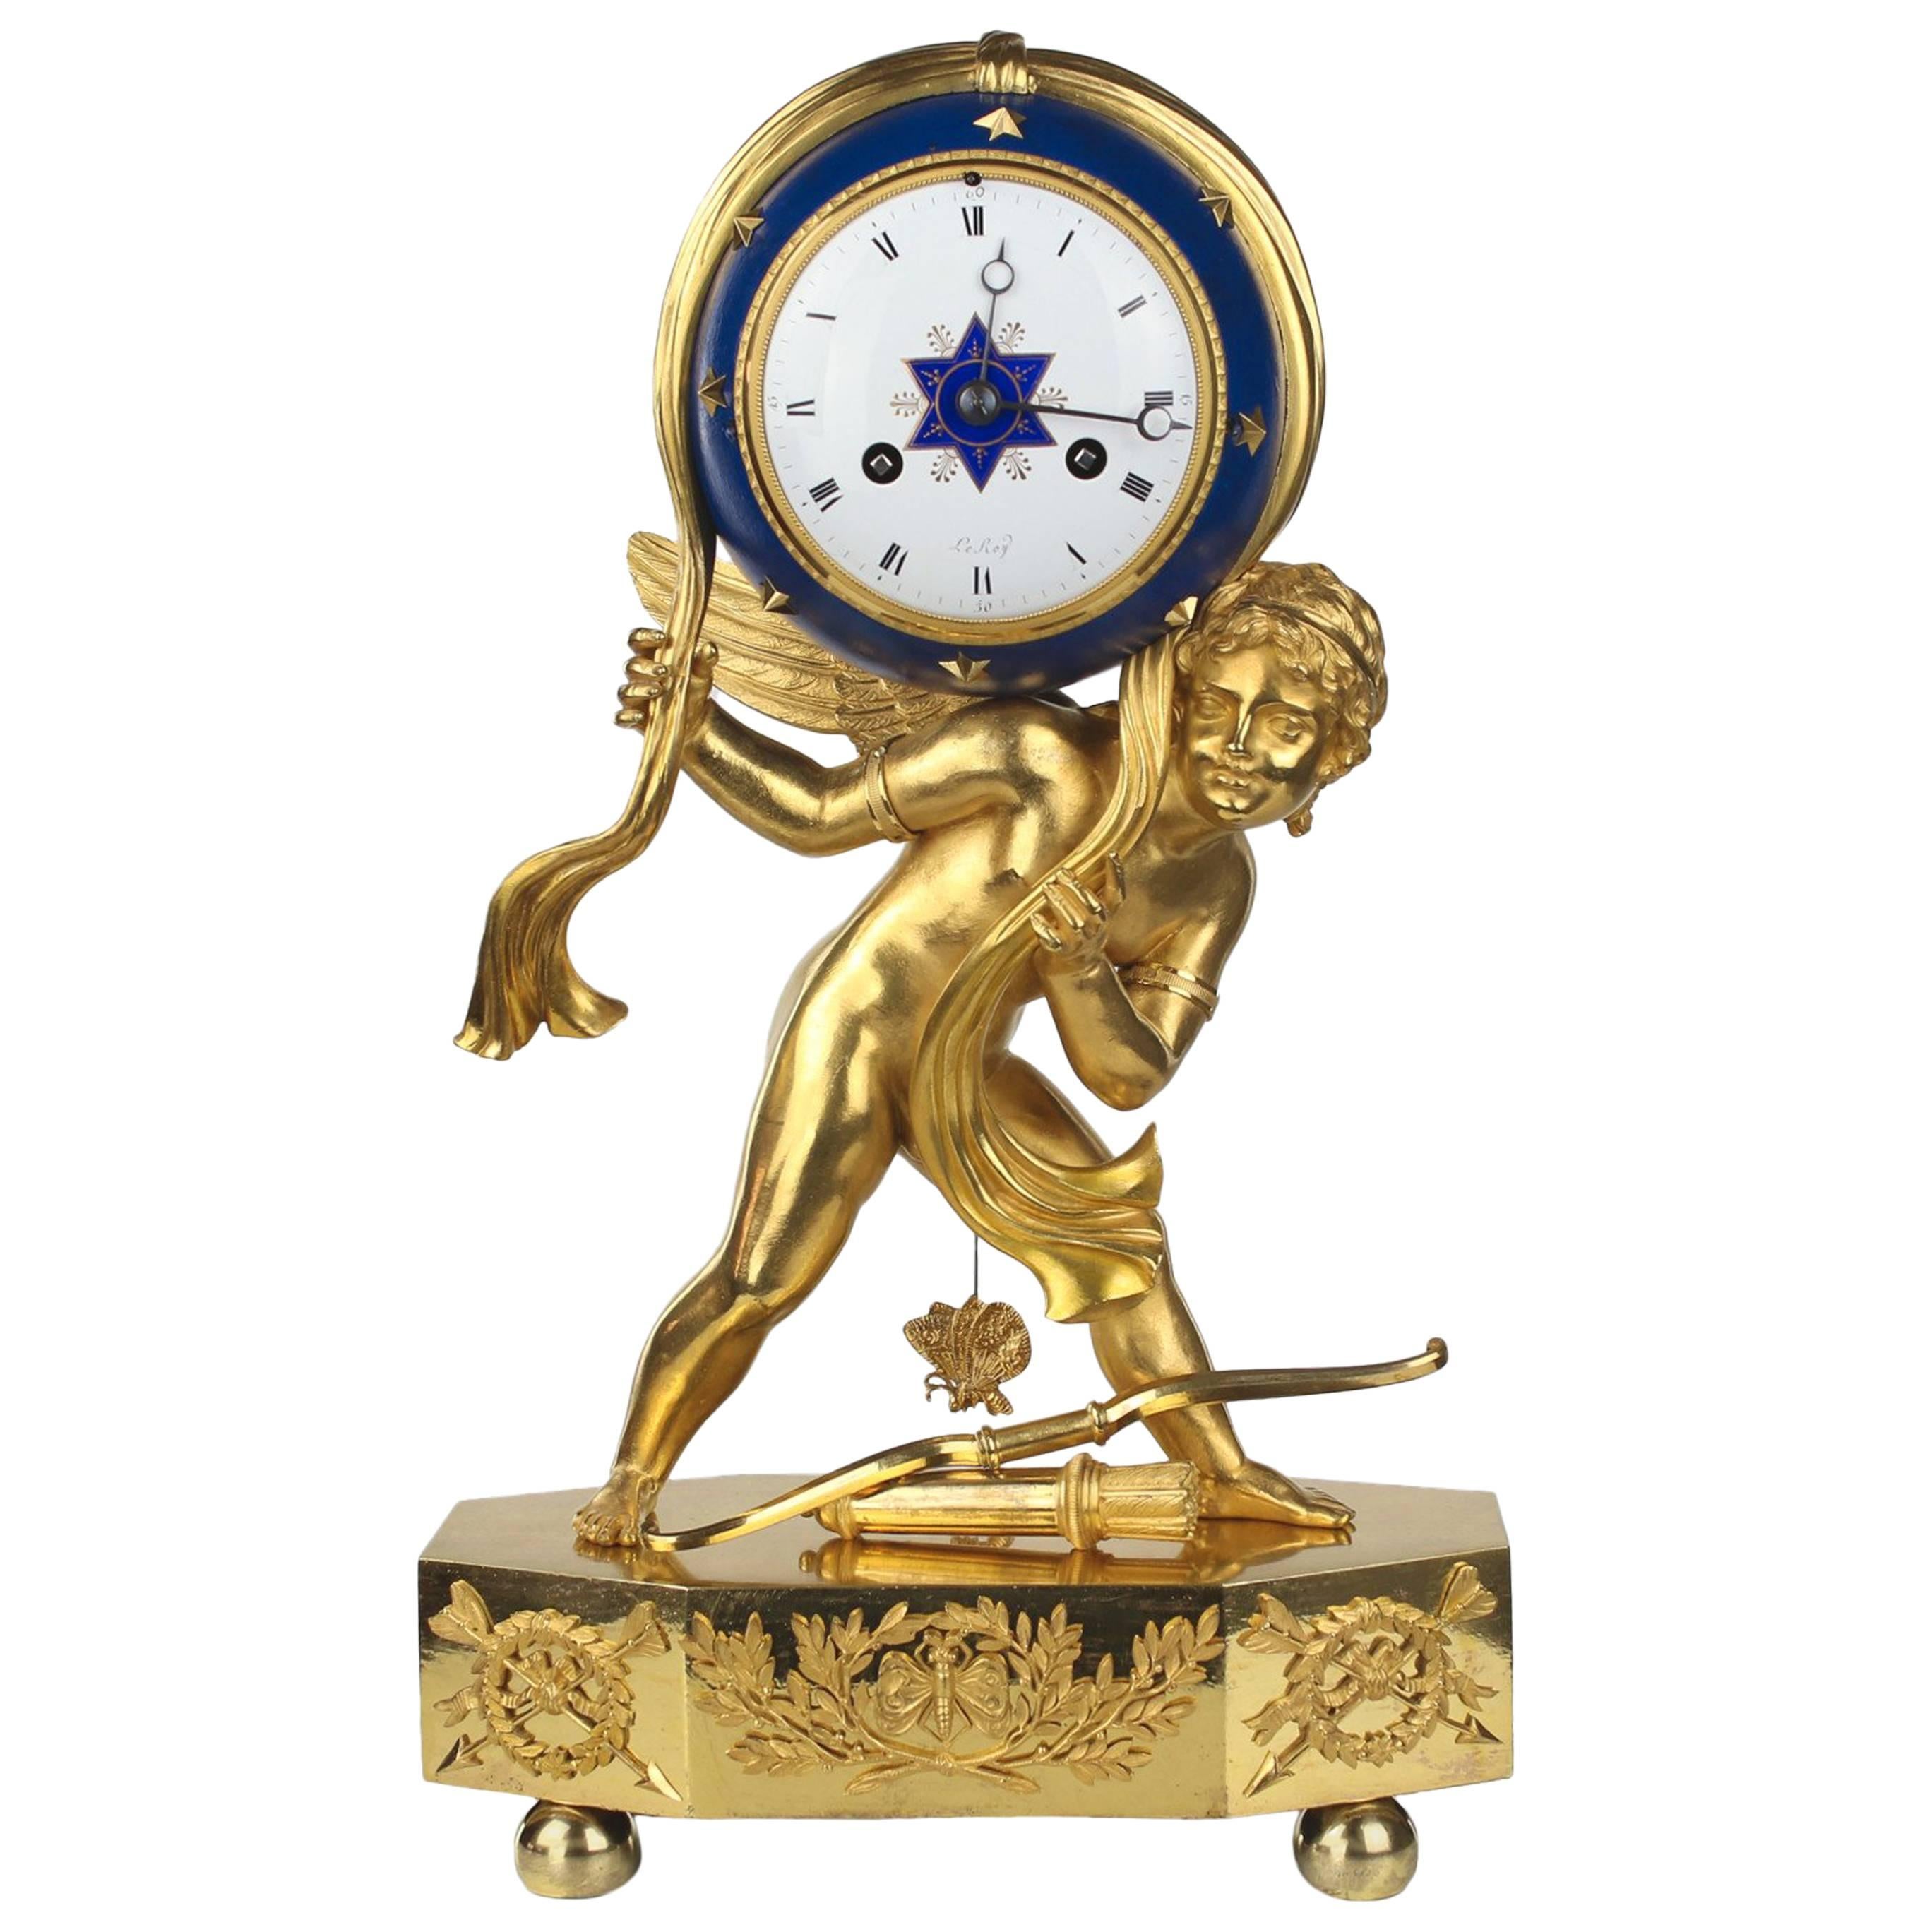 Unique Table Clock "Cupid as a Ruler of the Universe", France, circa 1800-1810